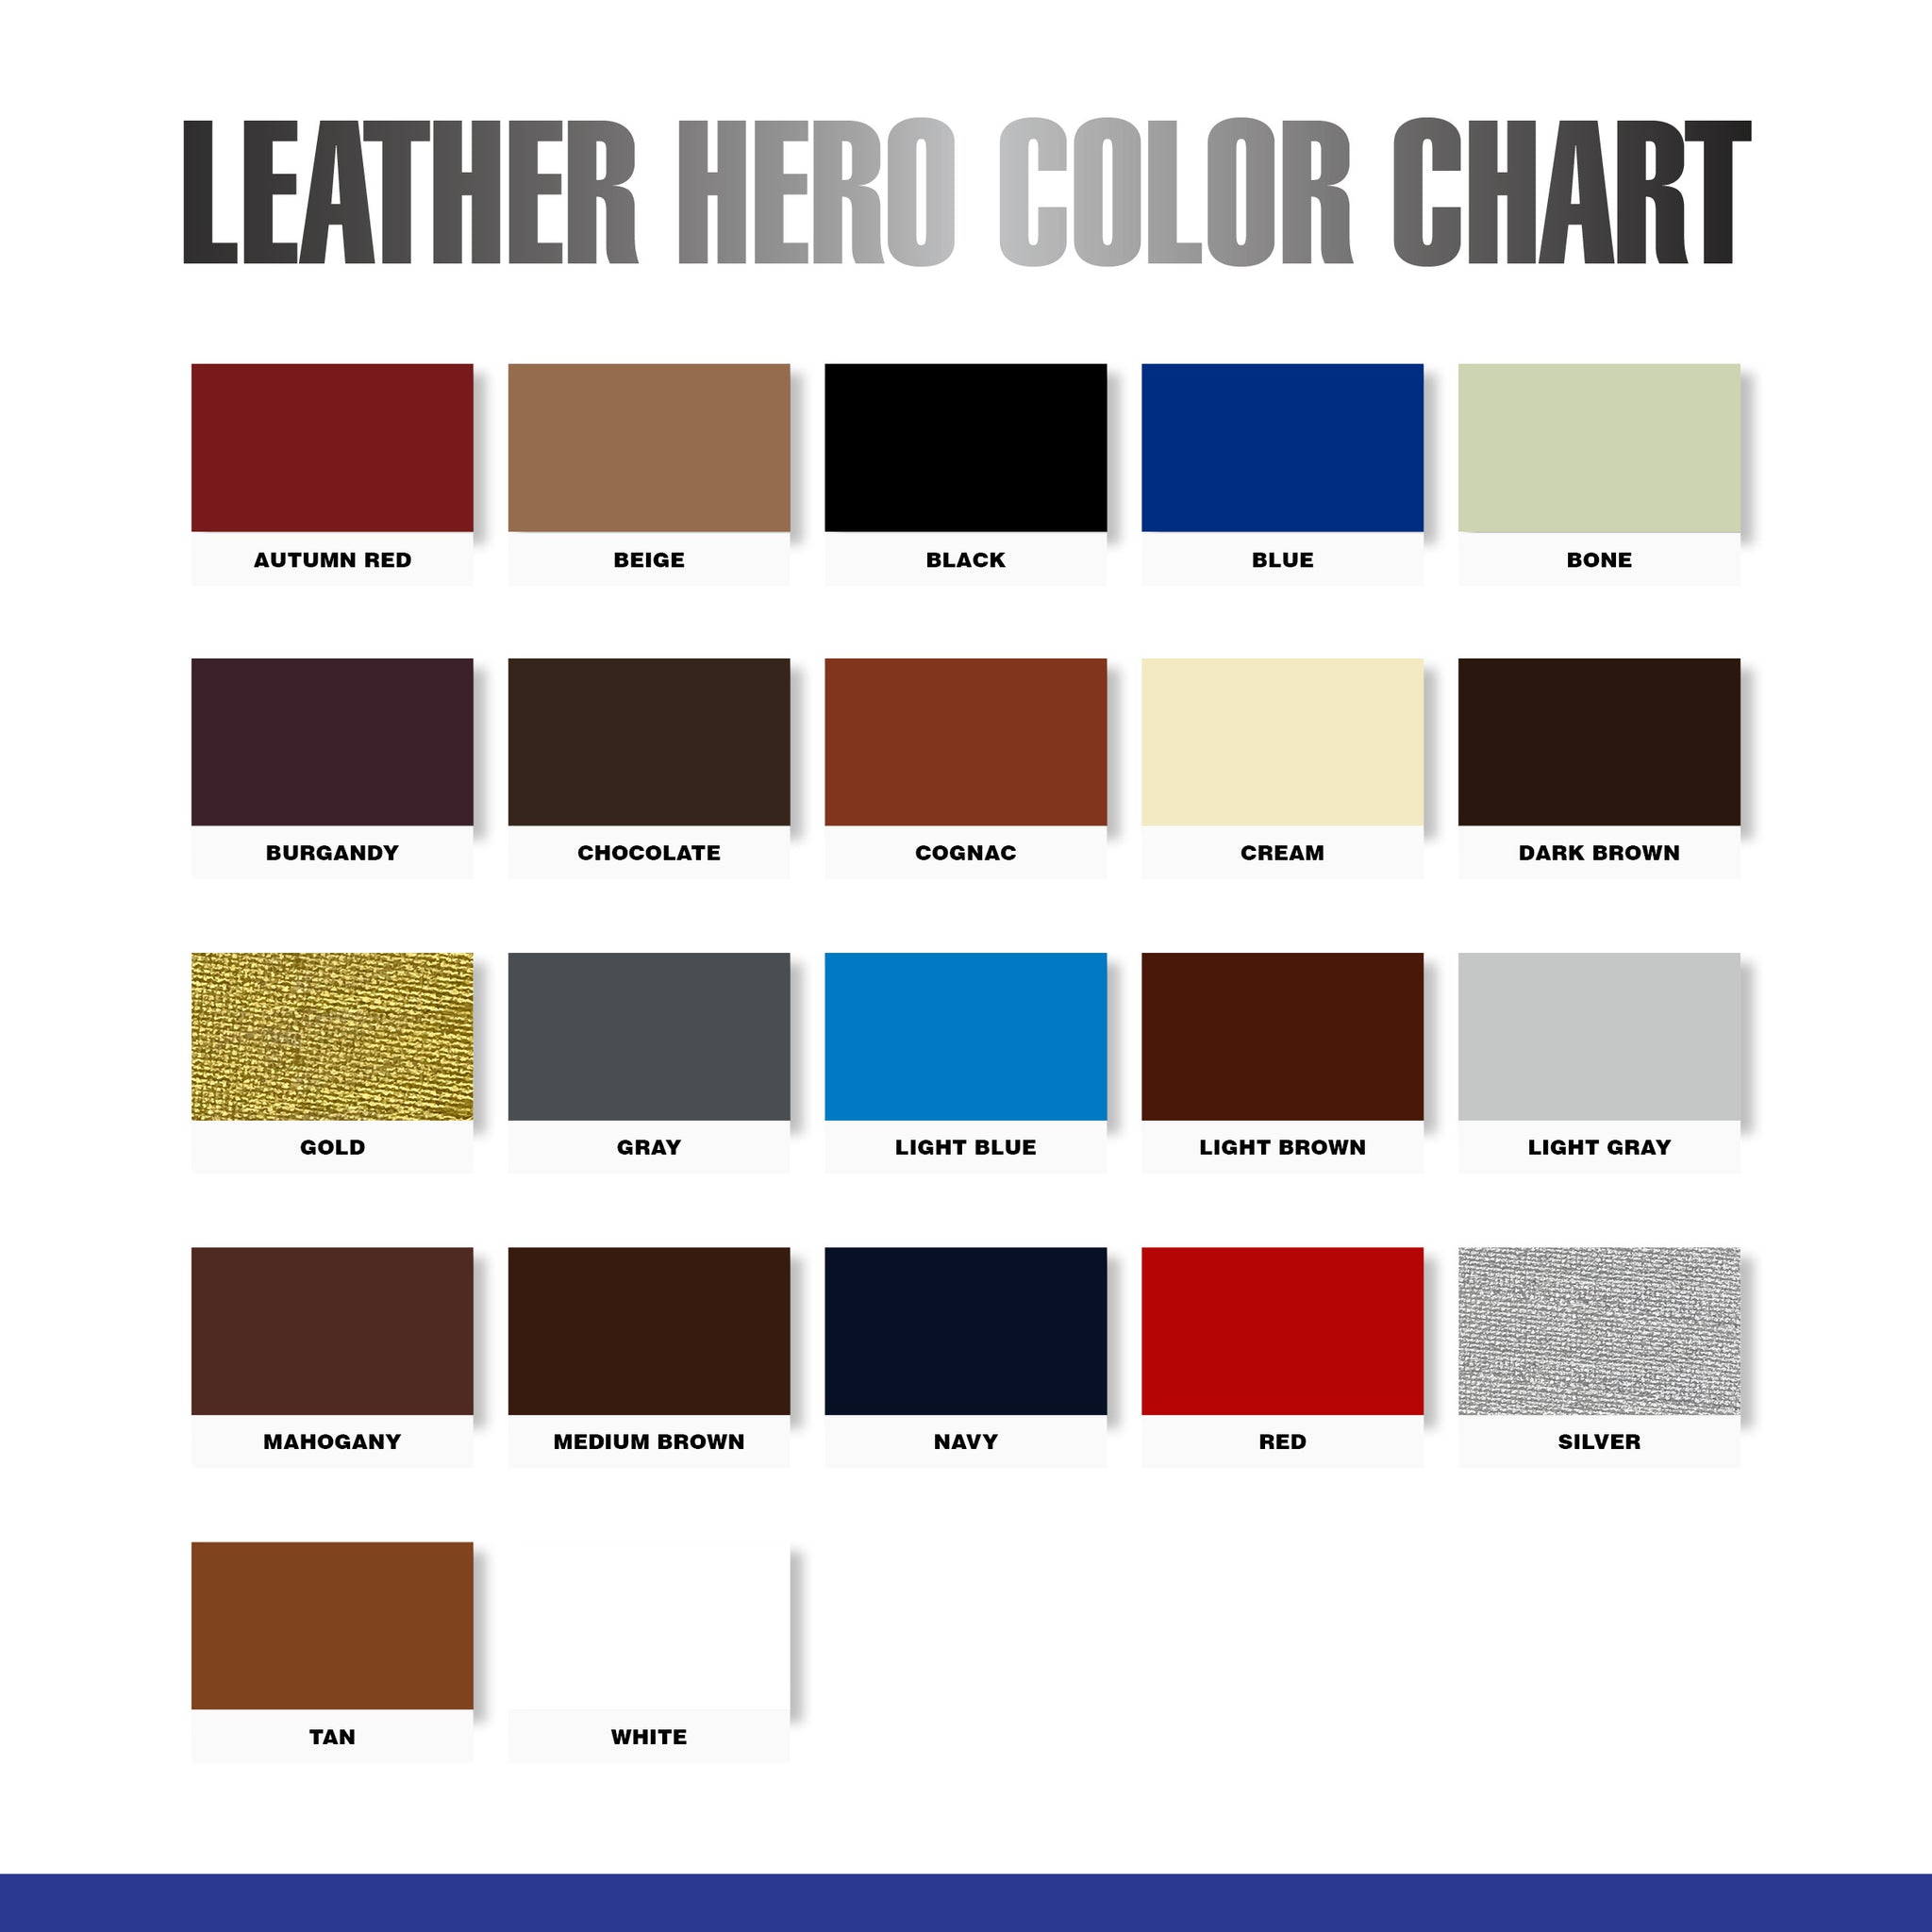  Leather Hero Leather Color Restorer for Couches